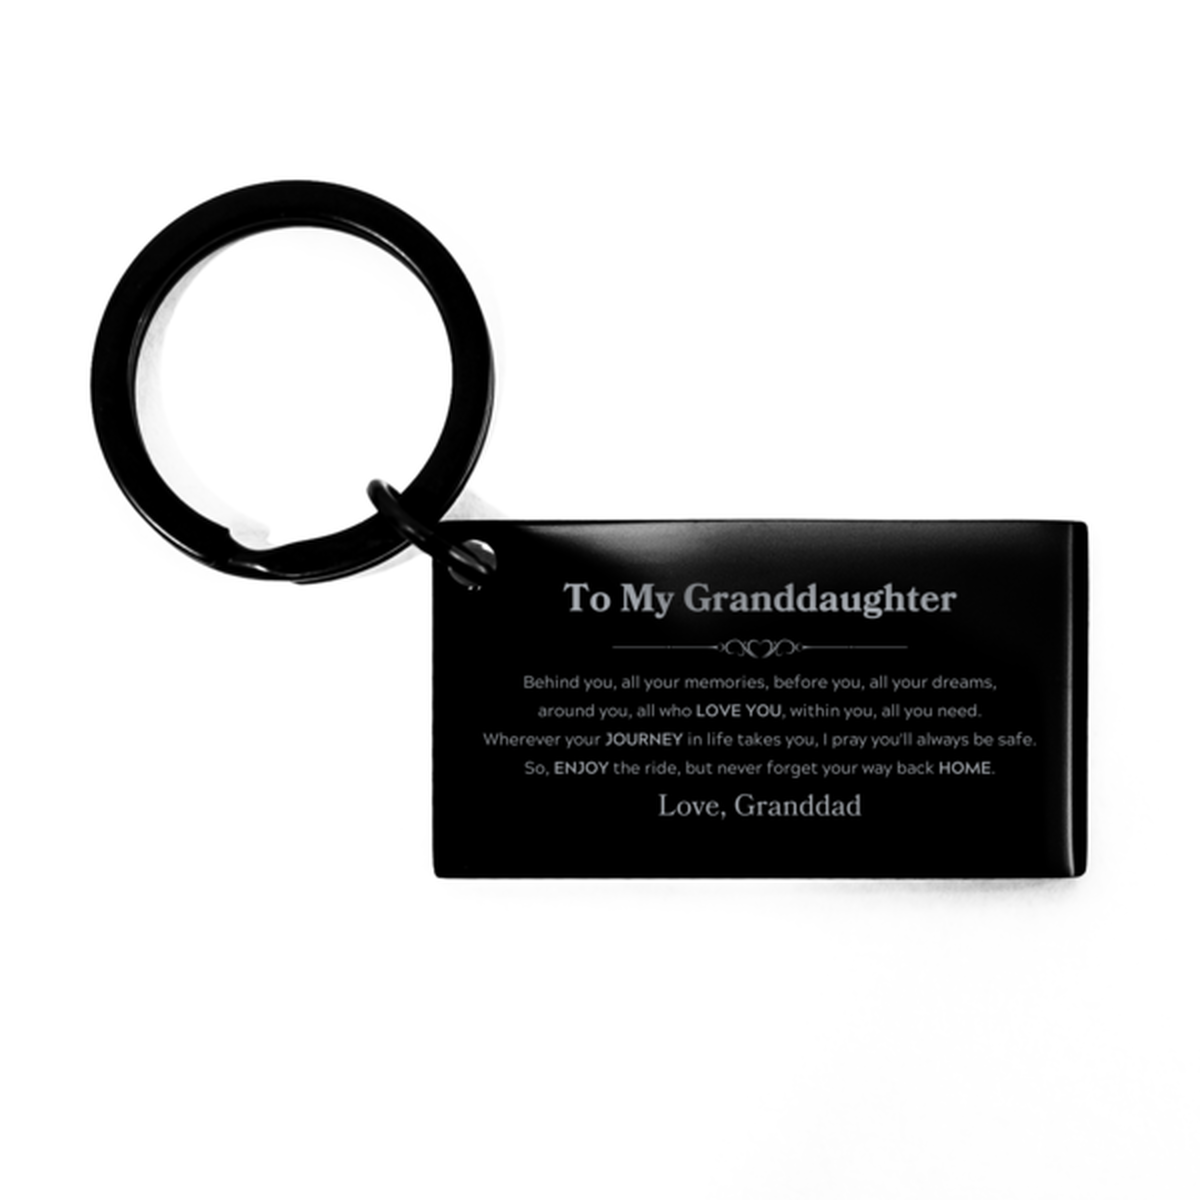 To My Granddaughter Graduation Gifts from Granddad, Granddaughter Keychain Christmas Birthday Gifts for Granddaughter Behind you, all your memories, before you, all your dreams. Love, Granddad